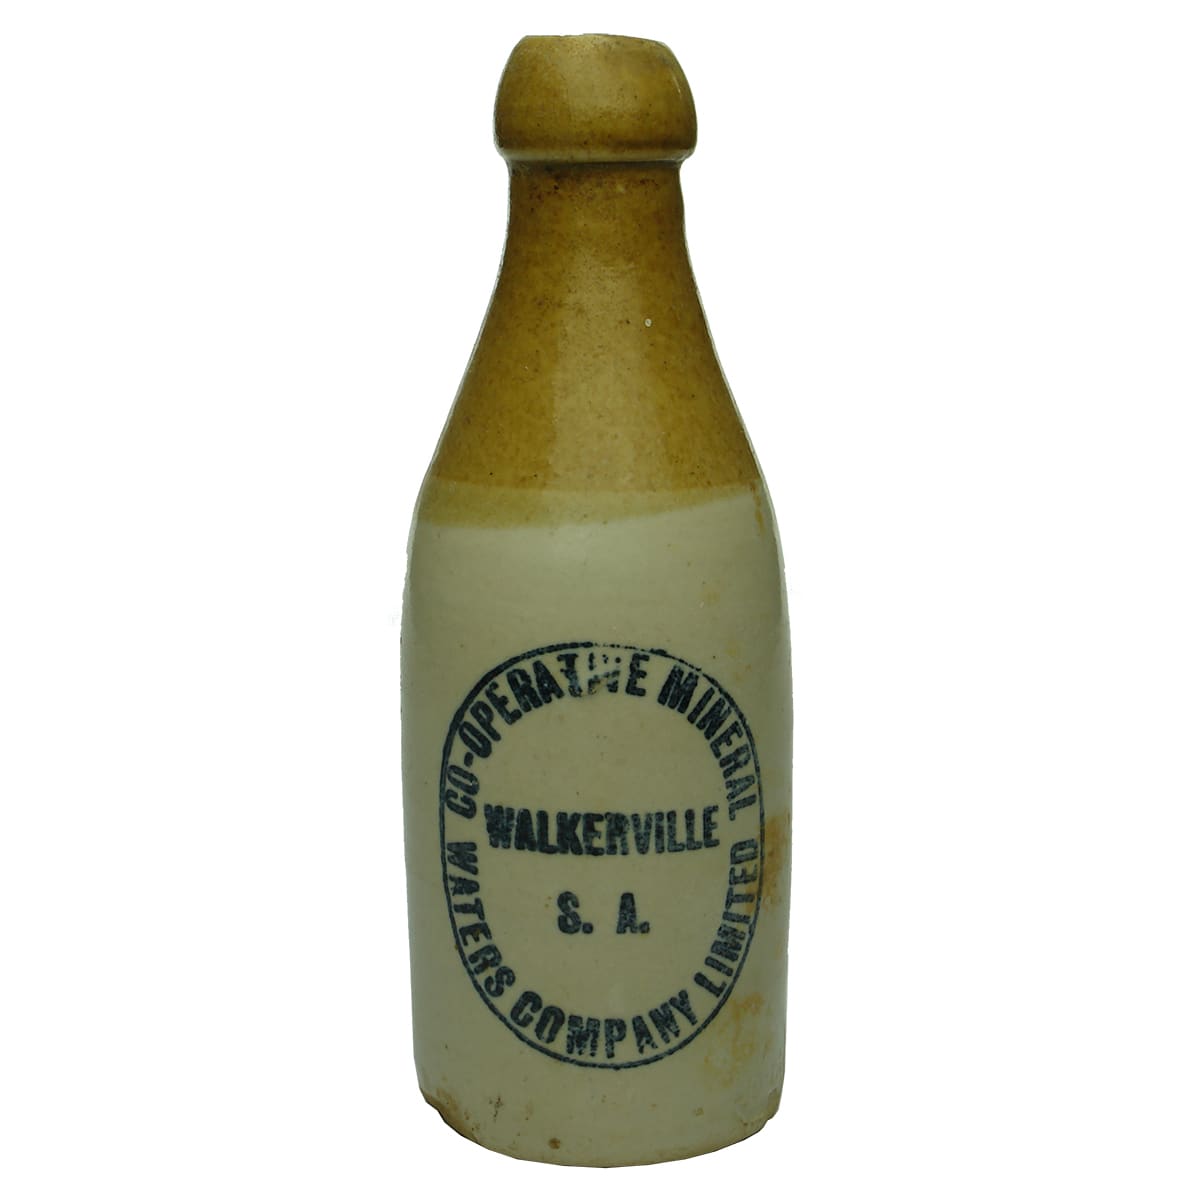 Ginger Beer. Co-Operative Mineral Waters Company Limited, Walkerville. Champagne. Tan top. 10 oz. (South Australia)